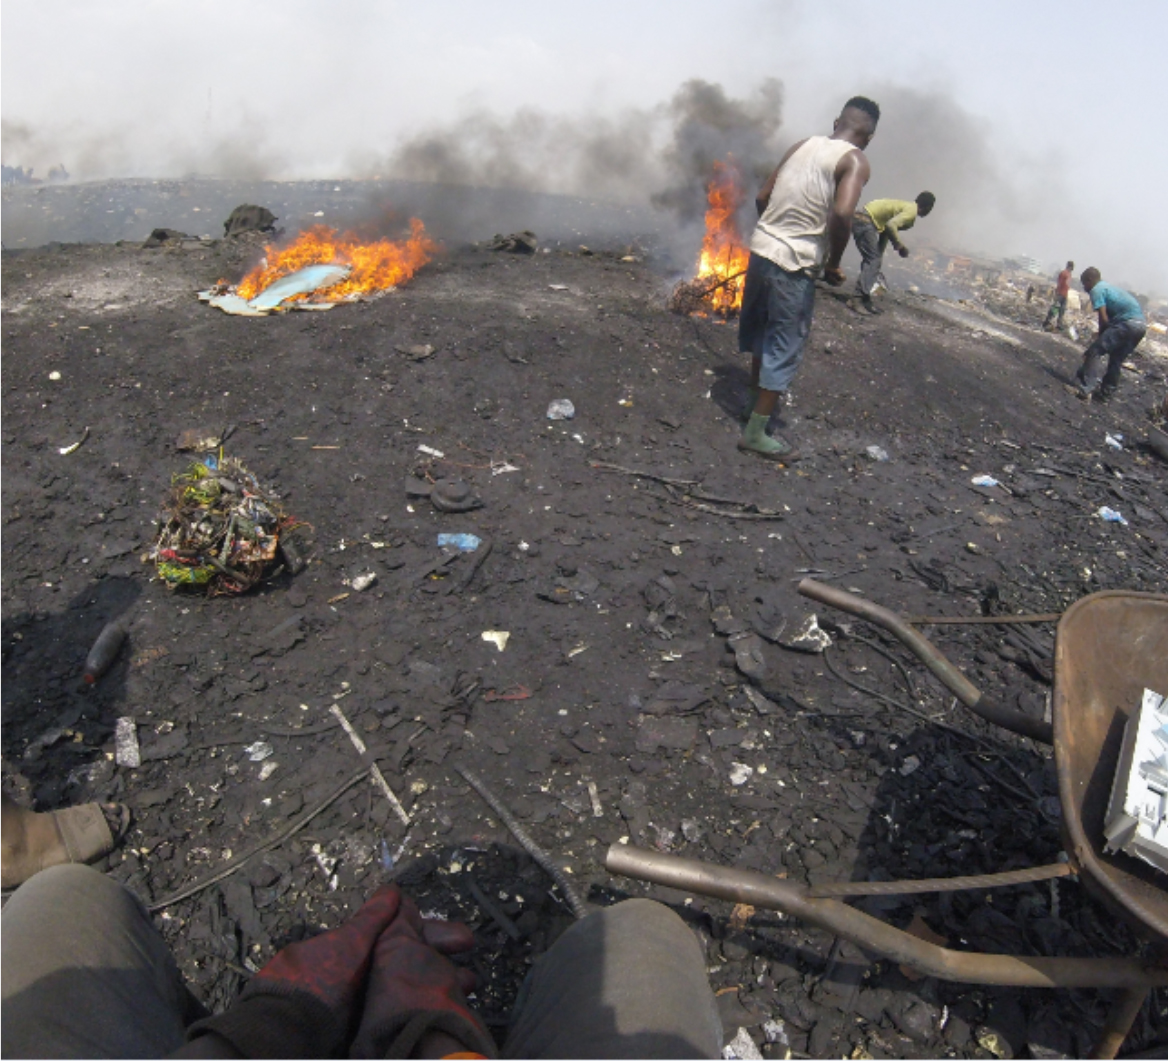 Workers burn e-waste to recover valuable metals.